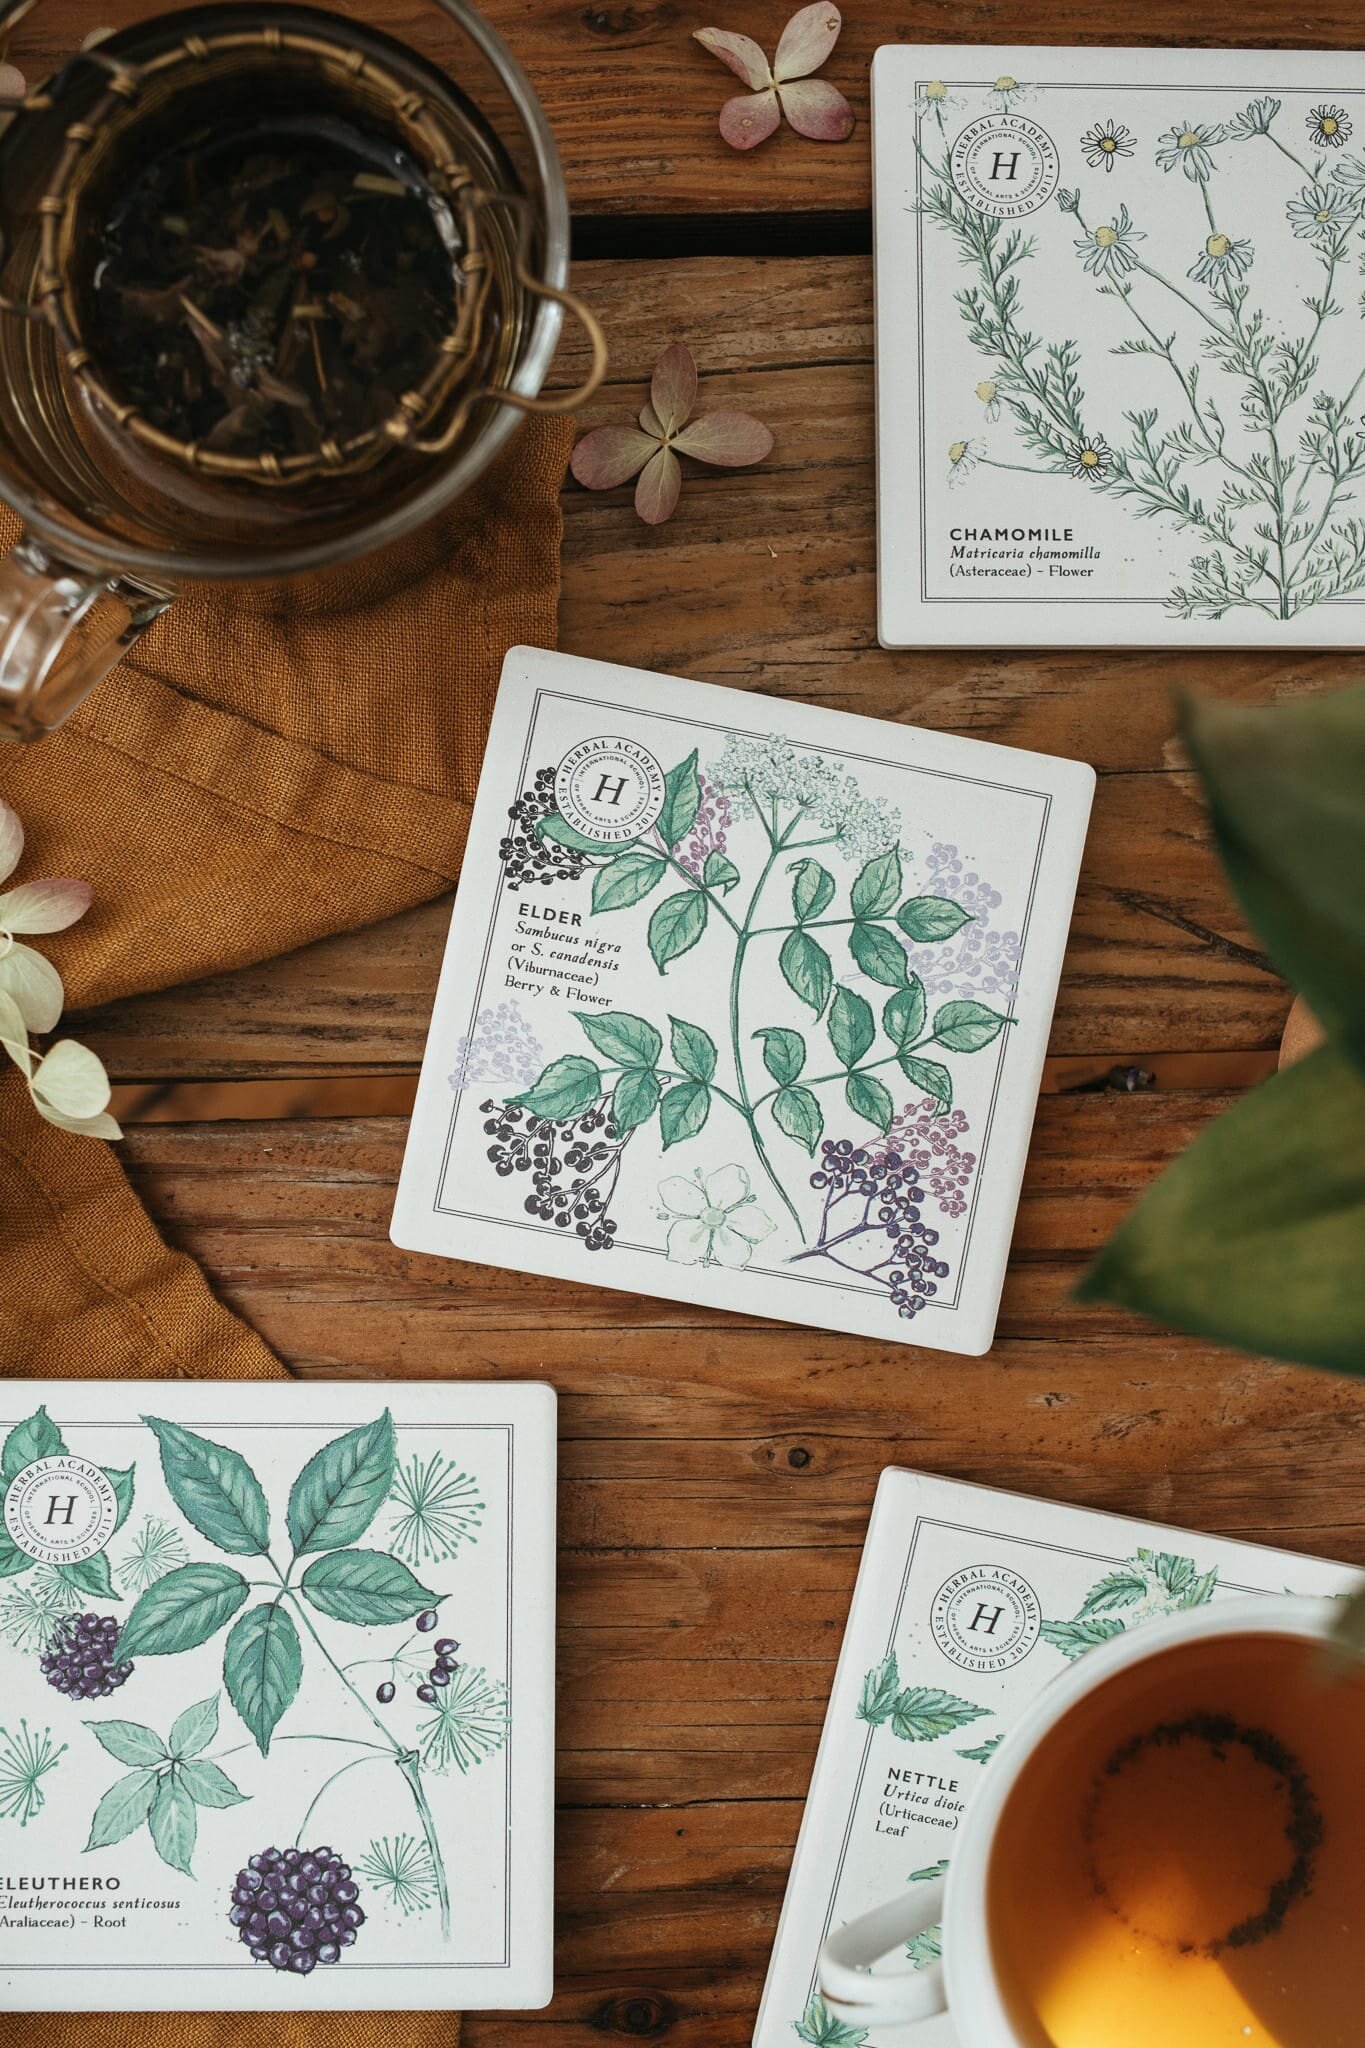 Who wants these Ceramic Botanical Coasters by @herbalacademy in their stocking this year? 🙋&zwj;♀️⁣
⁣
You can bet your bottom we&rsquo;re stocking up on these beauties for our herb-loving friends. 🌿⁣
⁣
📷 by our Founder @hannah_aften, a member of H